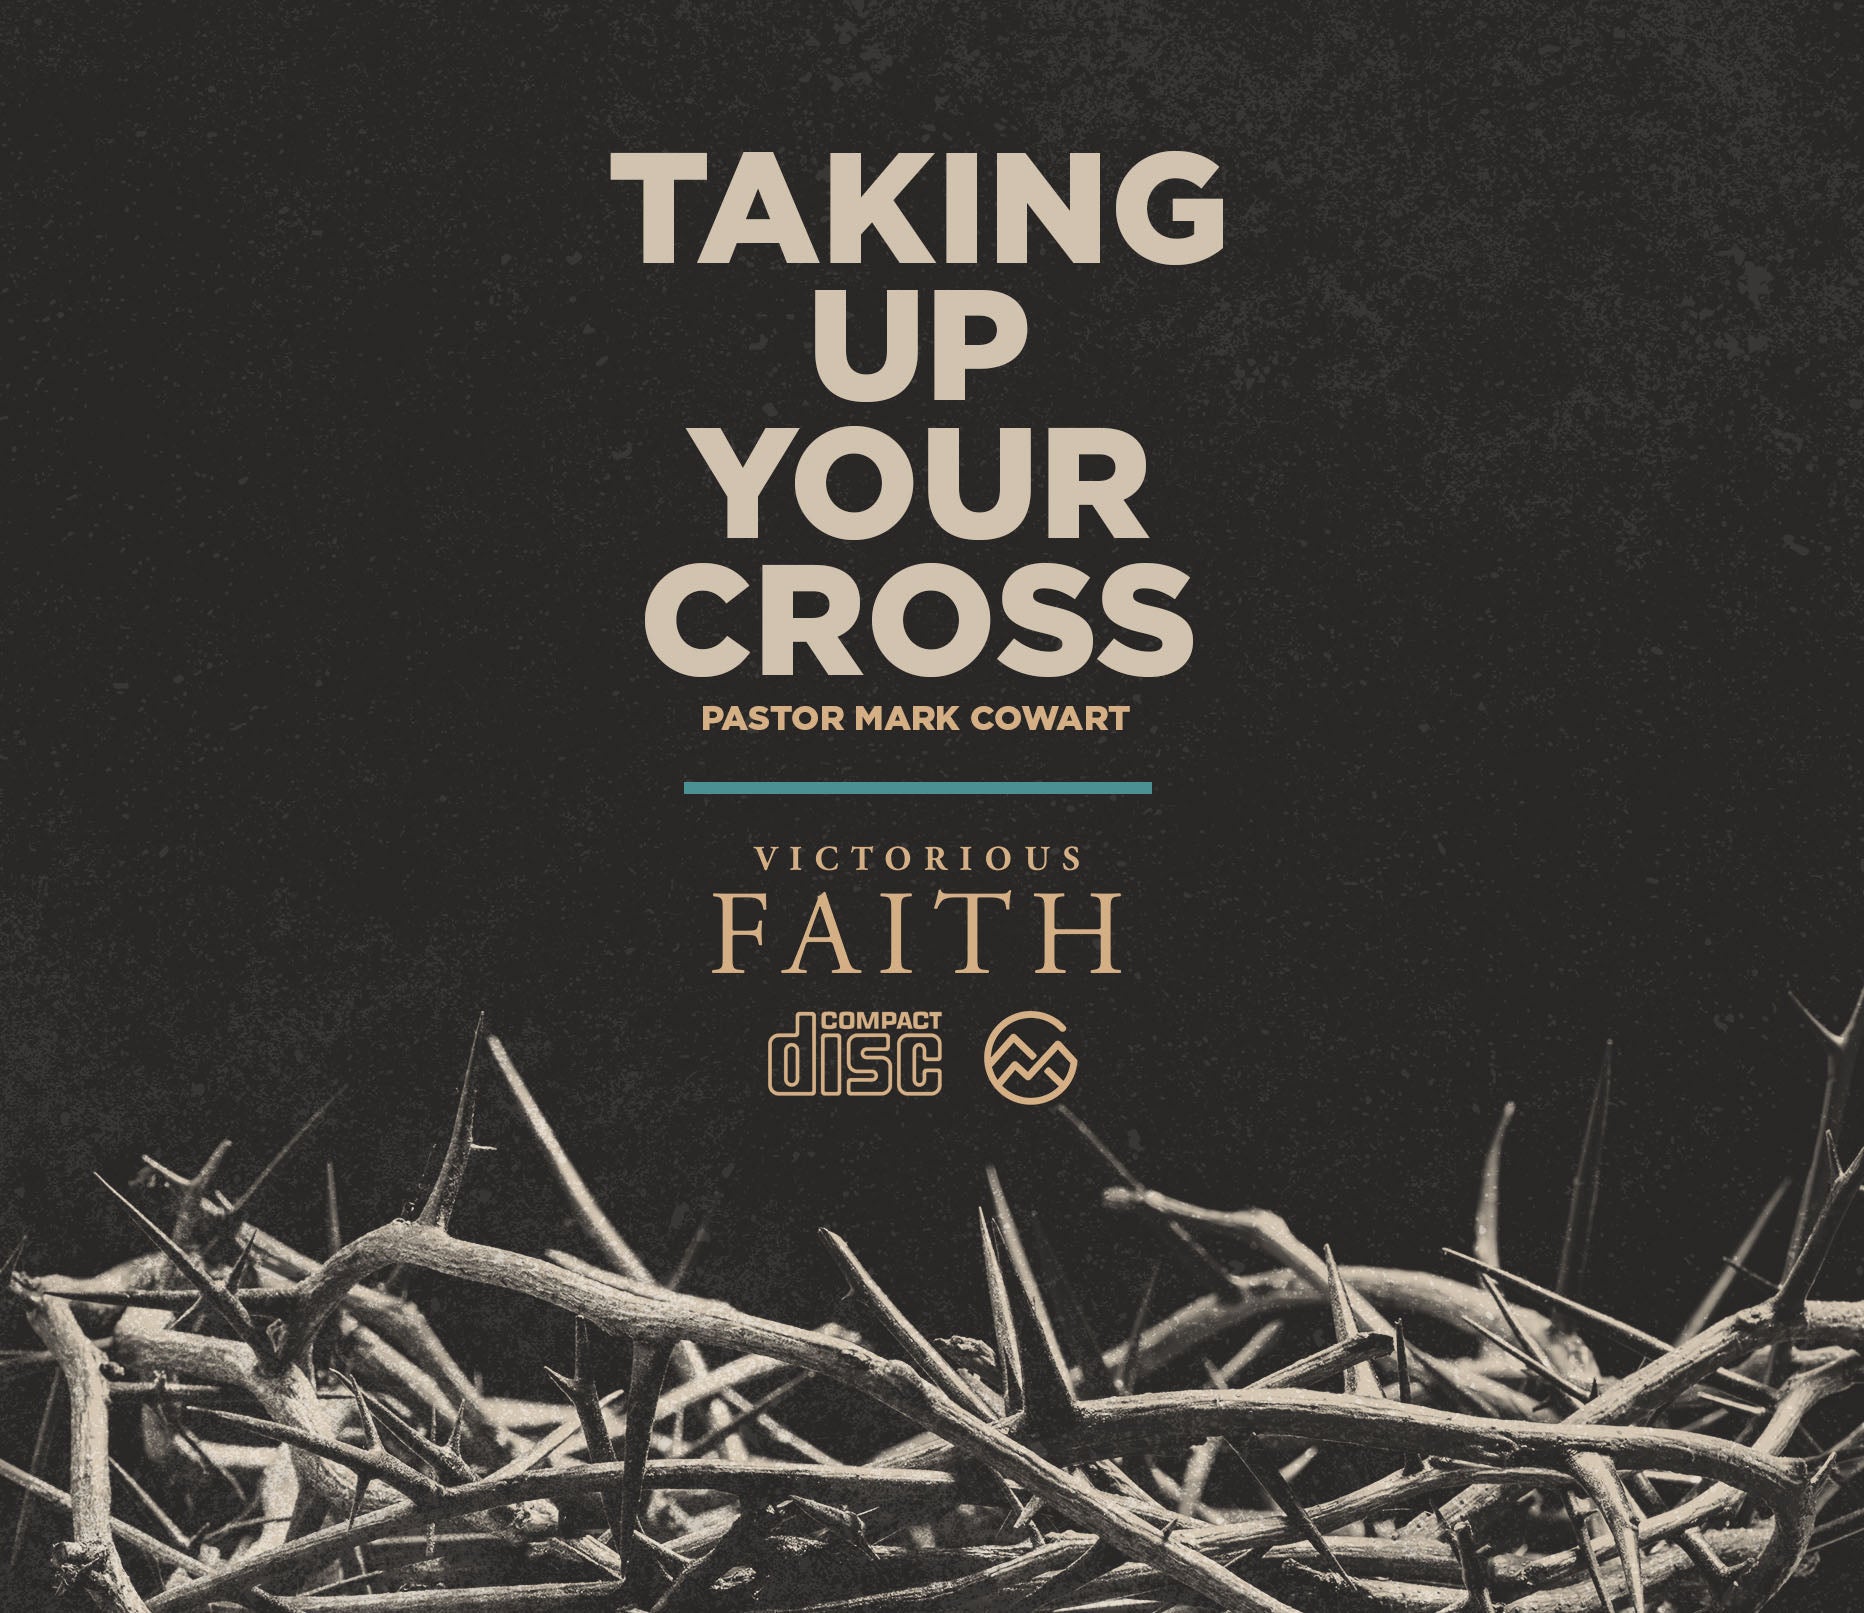 Taking Up Your Cross - Pastor Mark Cowart - Victorious Faith CD format